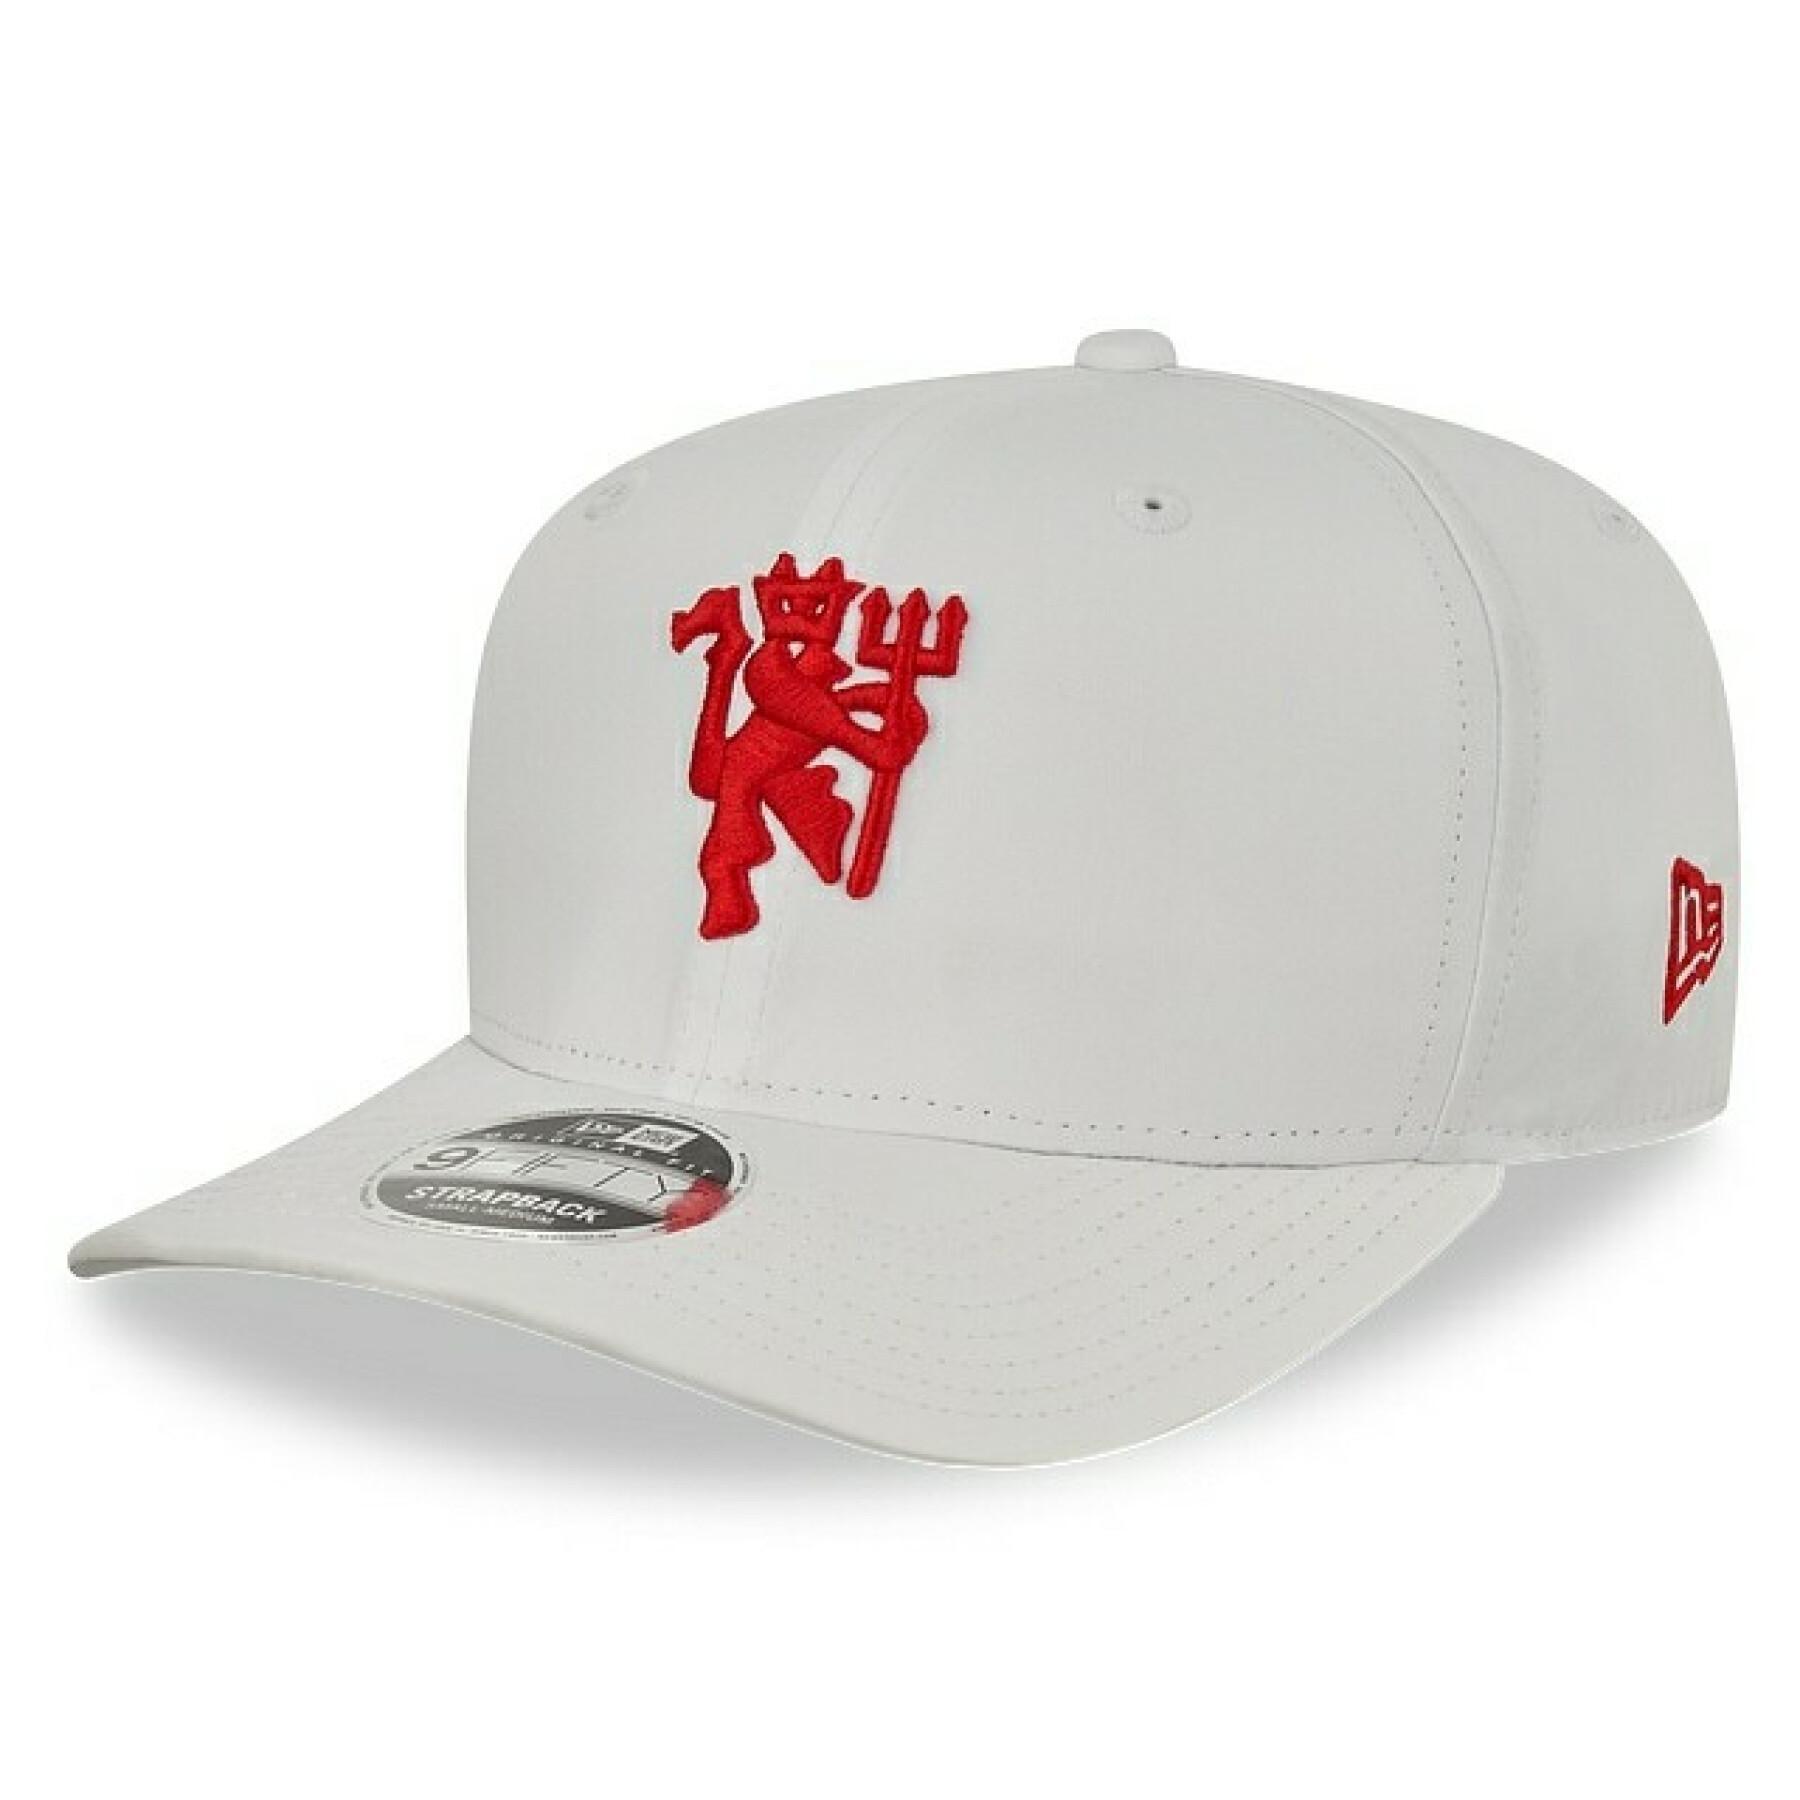 Casquette 9fifty Manchester United 2021/22